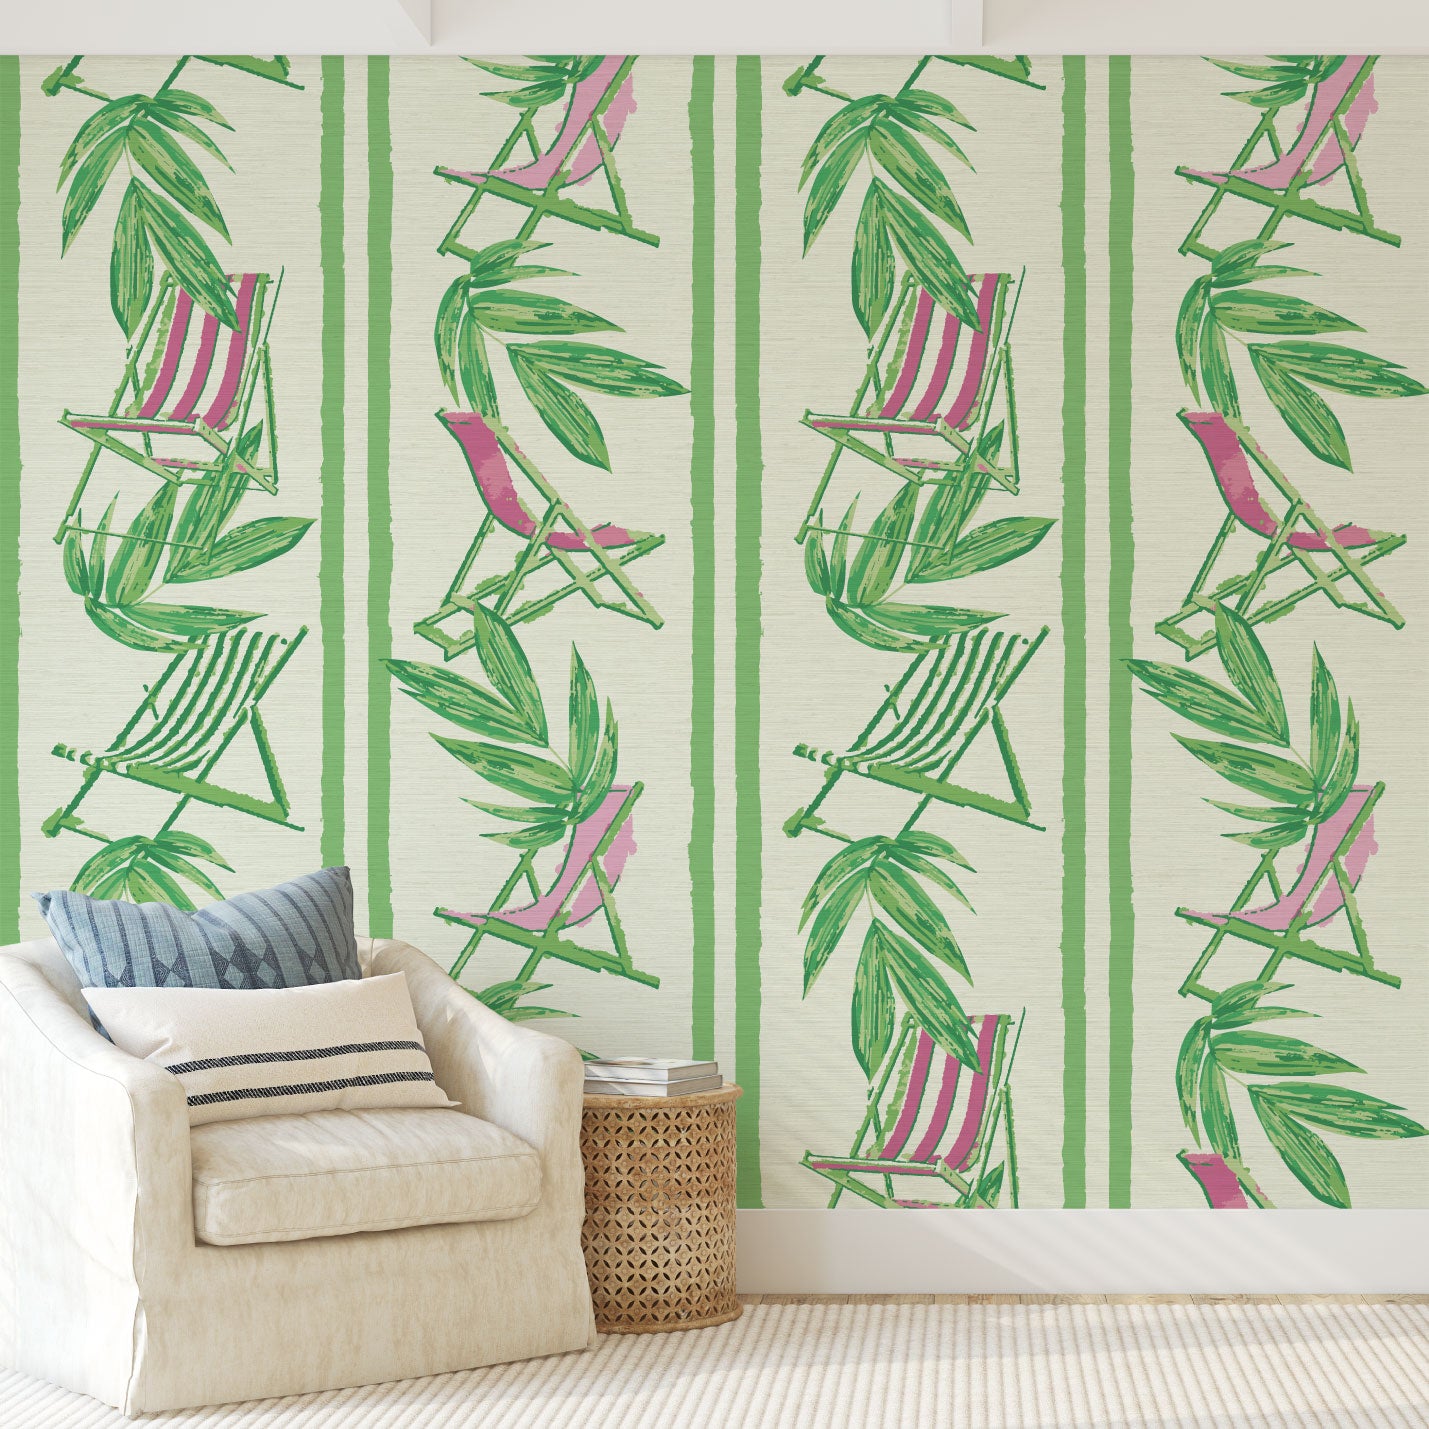 Load image into Gallery viewer, vertical linear grasscloth wallpaper print with a beachy design of green leaves and stripes paired with green and pink beach chairs arranged in a vertical oversized stripe Grasscloth Natural Textured Eco-Friendly Non-toxic High-quality  Sustainable practices Sustainability Interior Design Wall covering bold Seaside Coastal Seashore Waterfront Vacation home styling Retreat Relaxed beach vibes Beach cottage Shoreline Oceanfront Nautical living room sitting lounge
